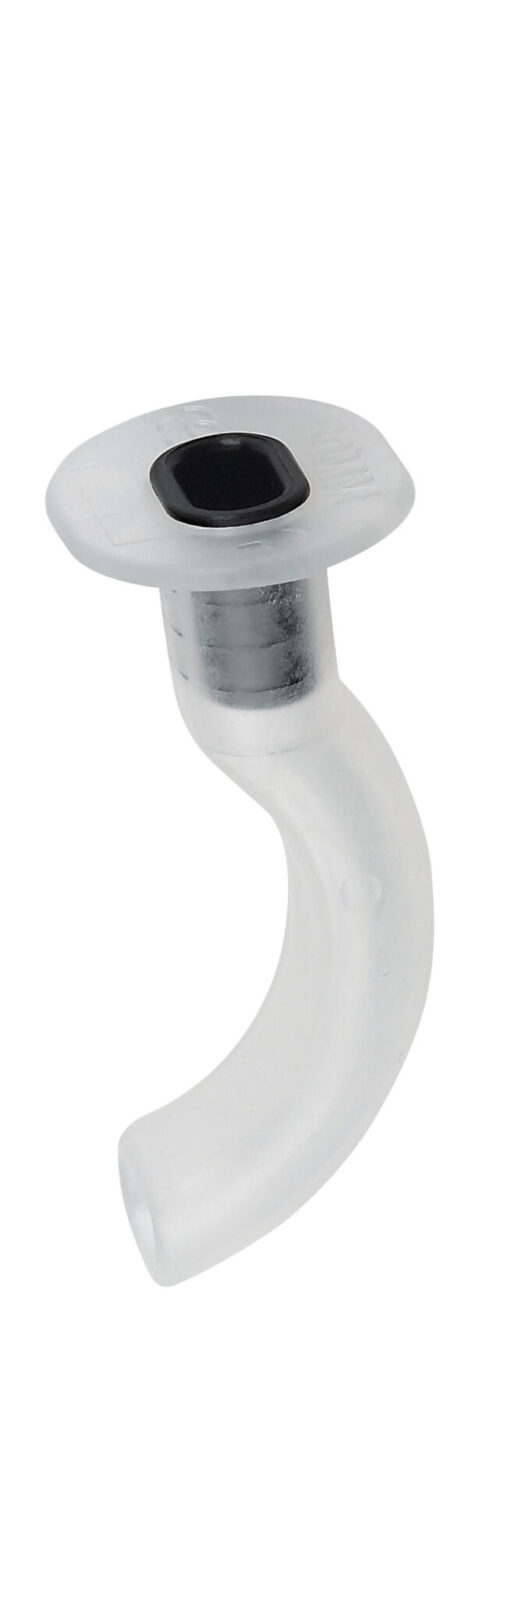 Kt services - oropharyngeal airway (opa) 60 - 110mm